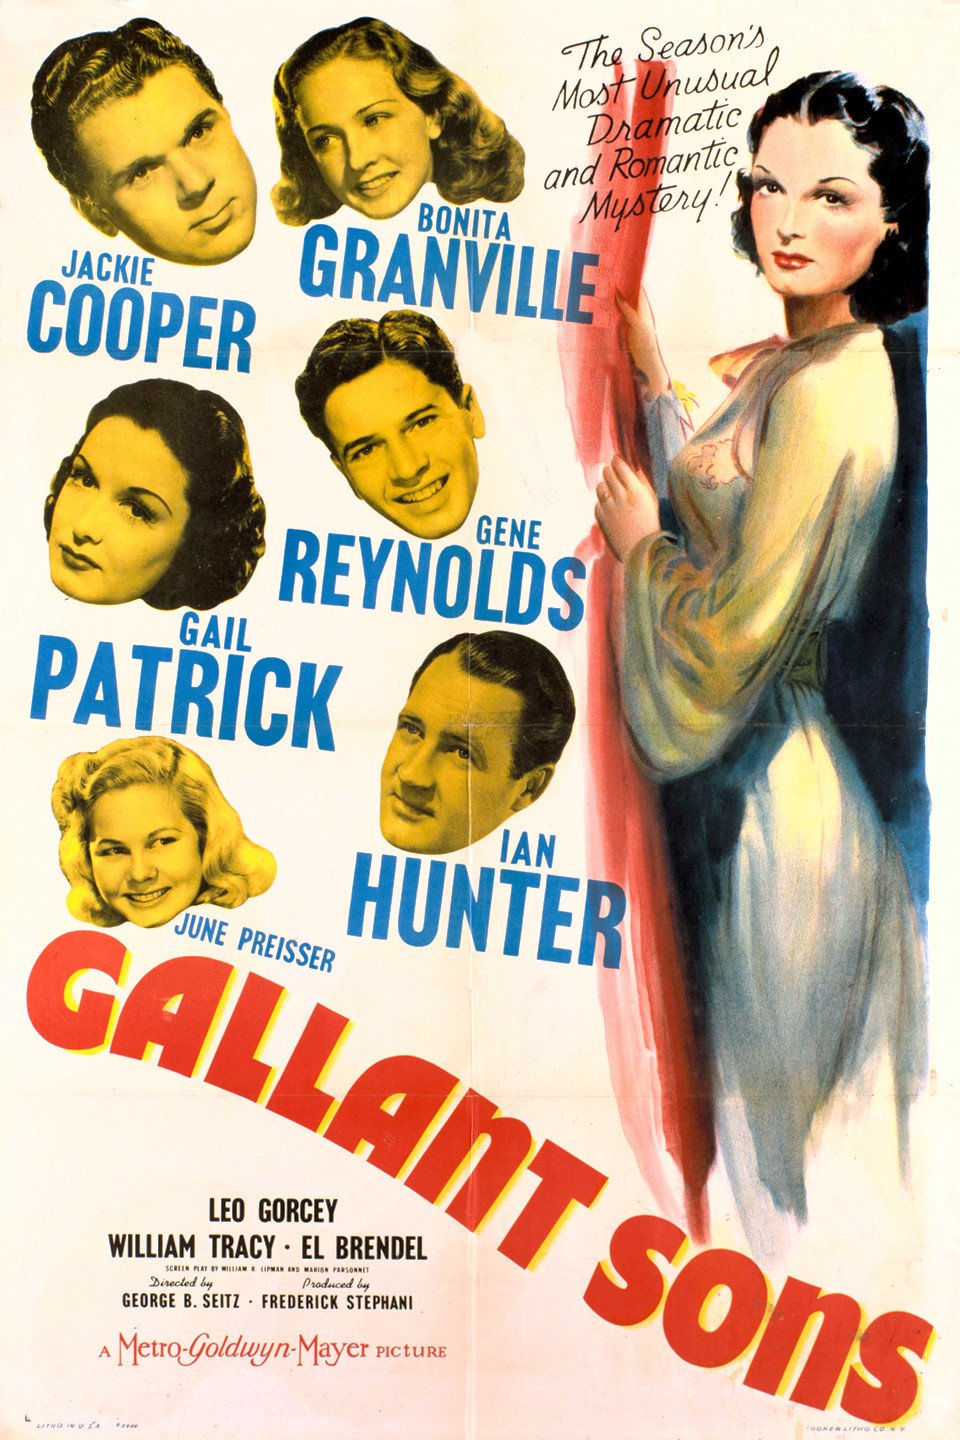 Poster of the movie Gallant Sons